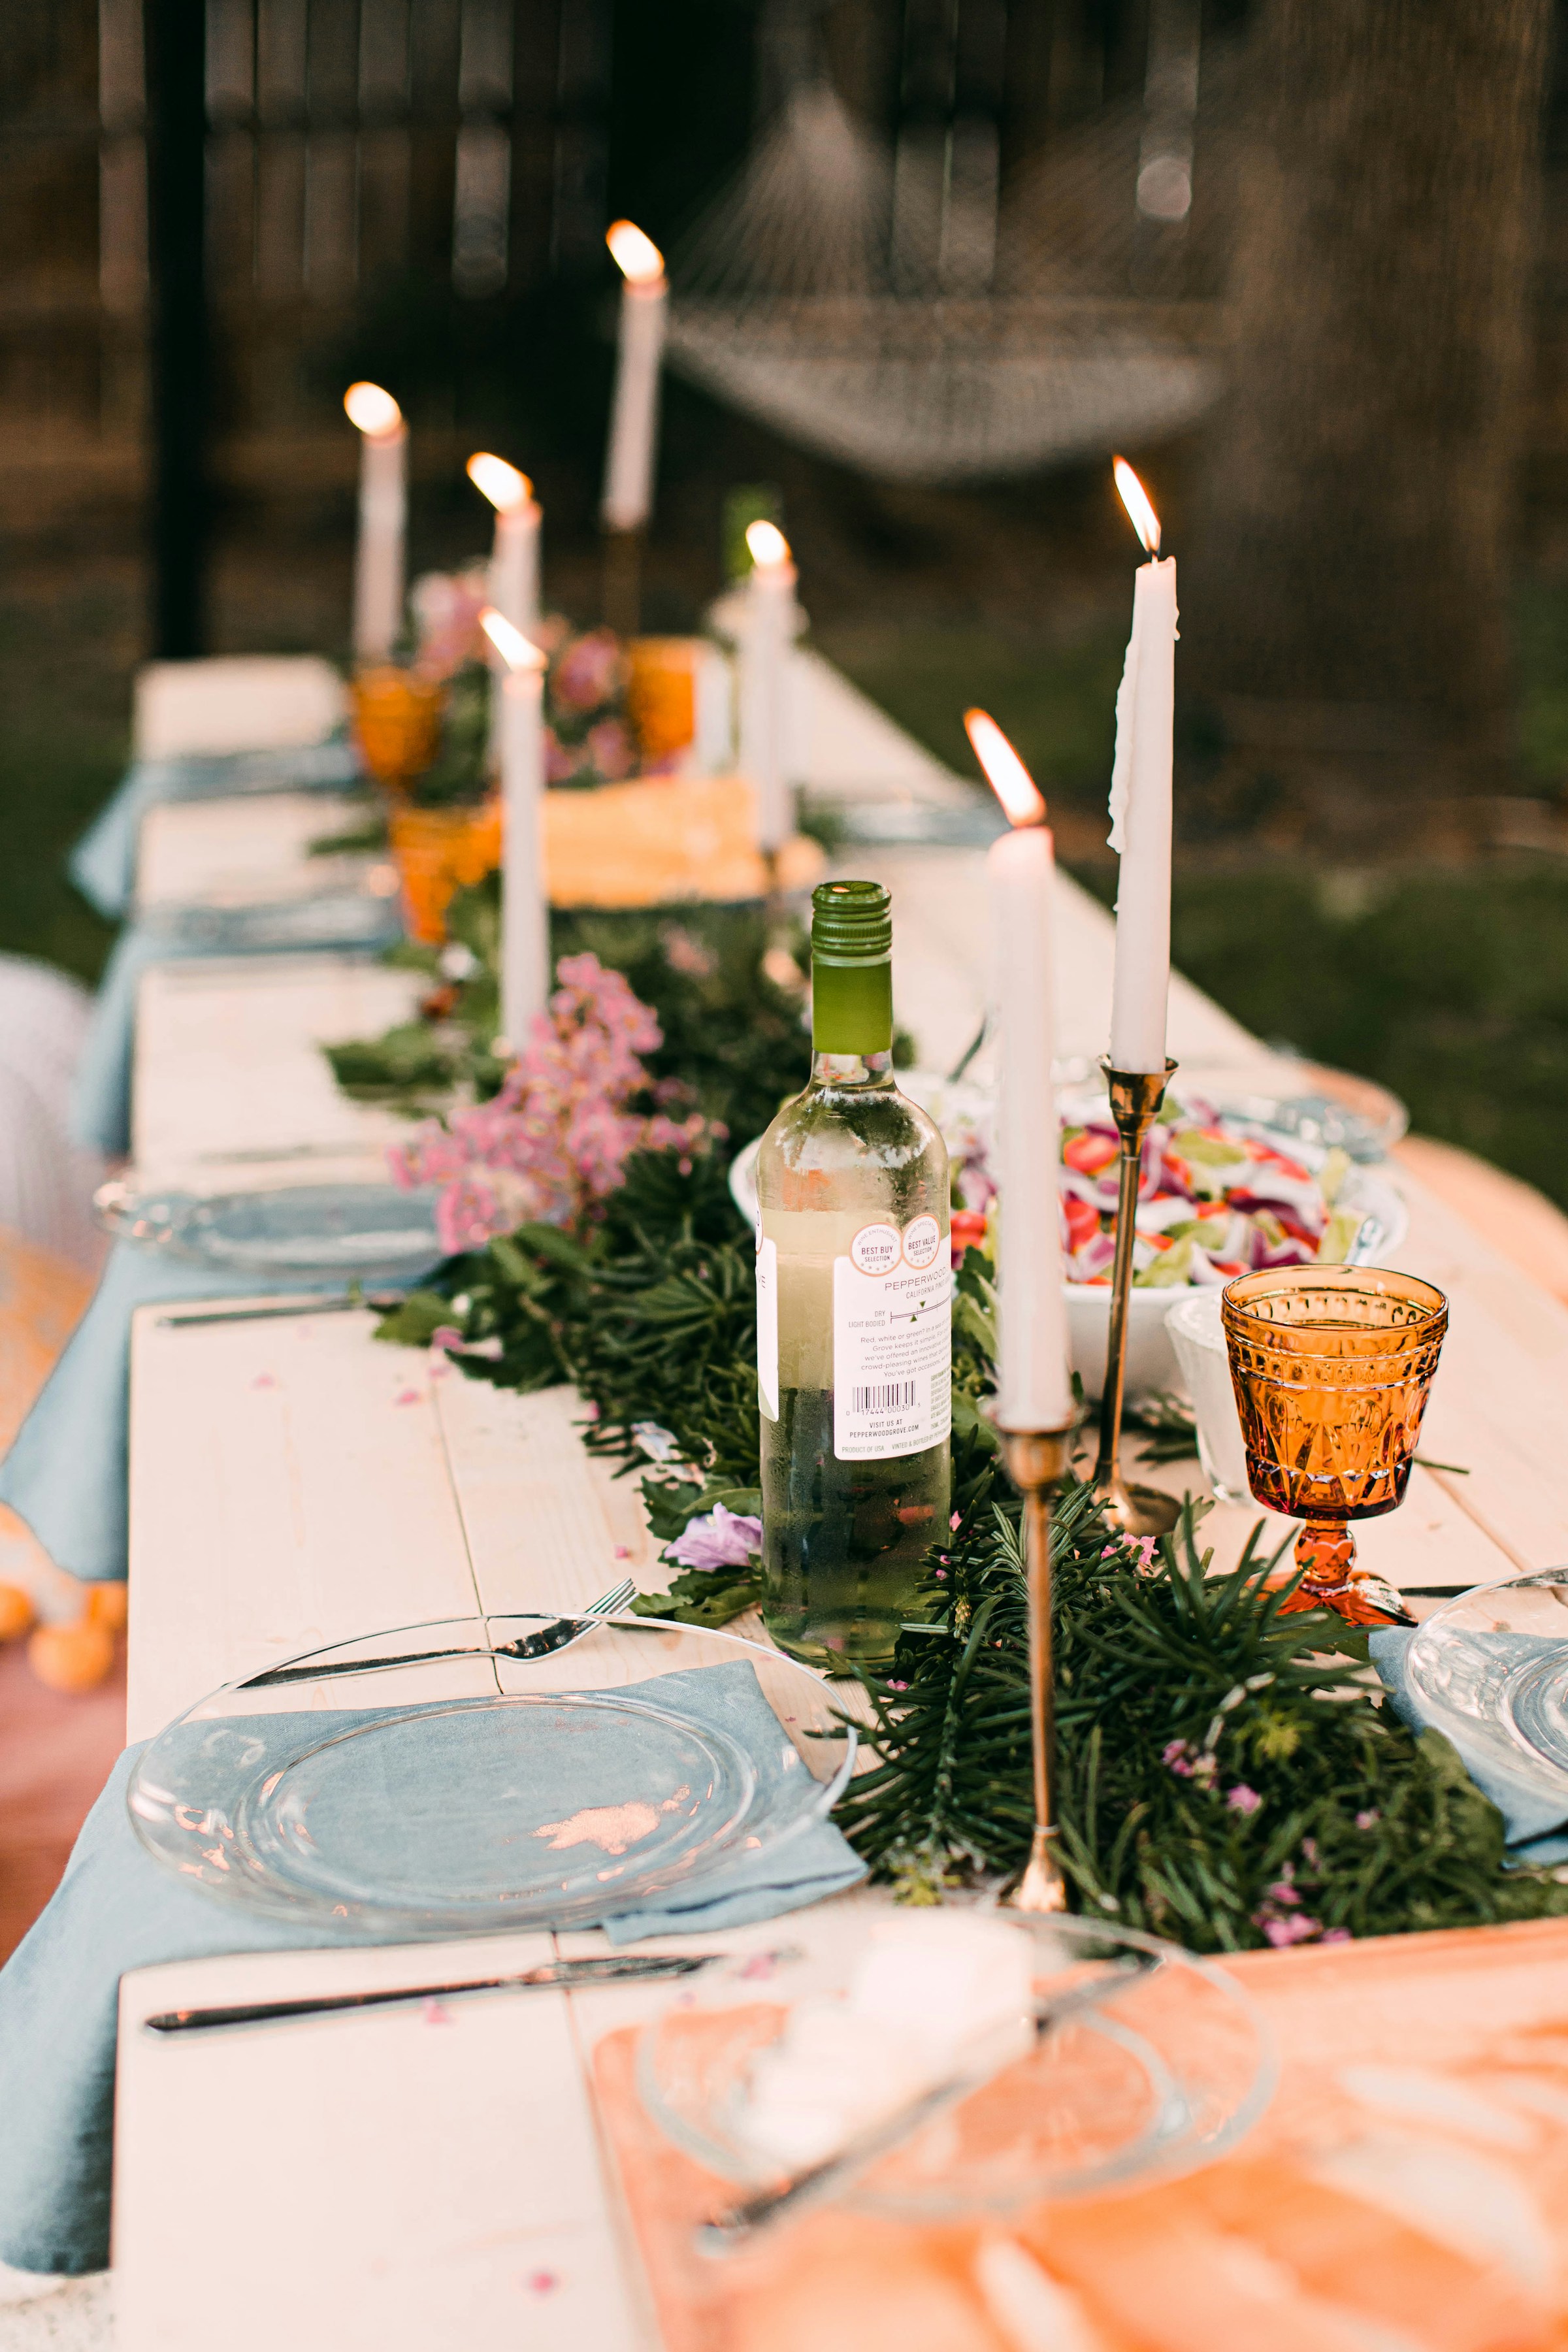 An outdoor table setting | Source: Unsplash